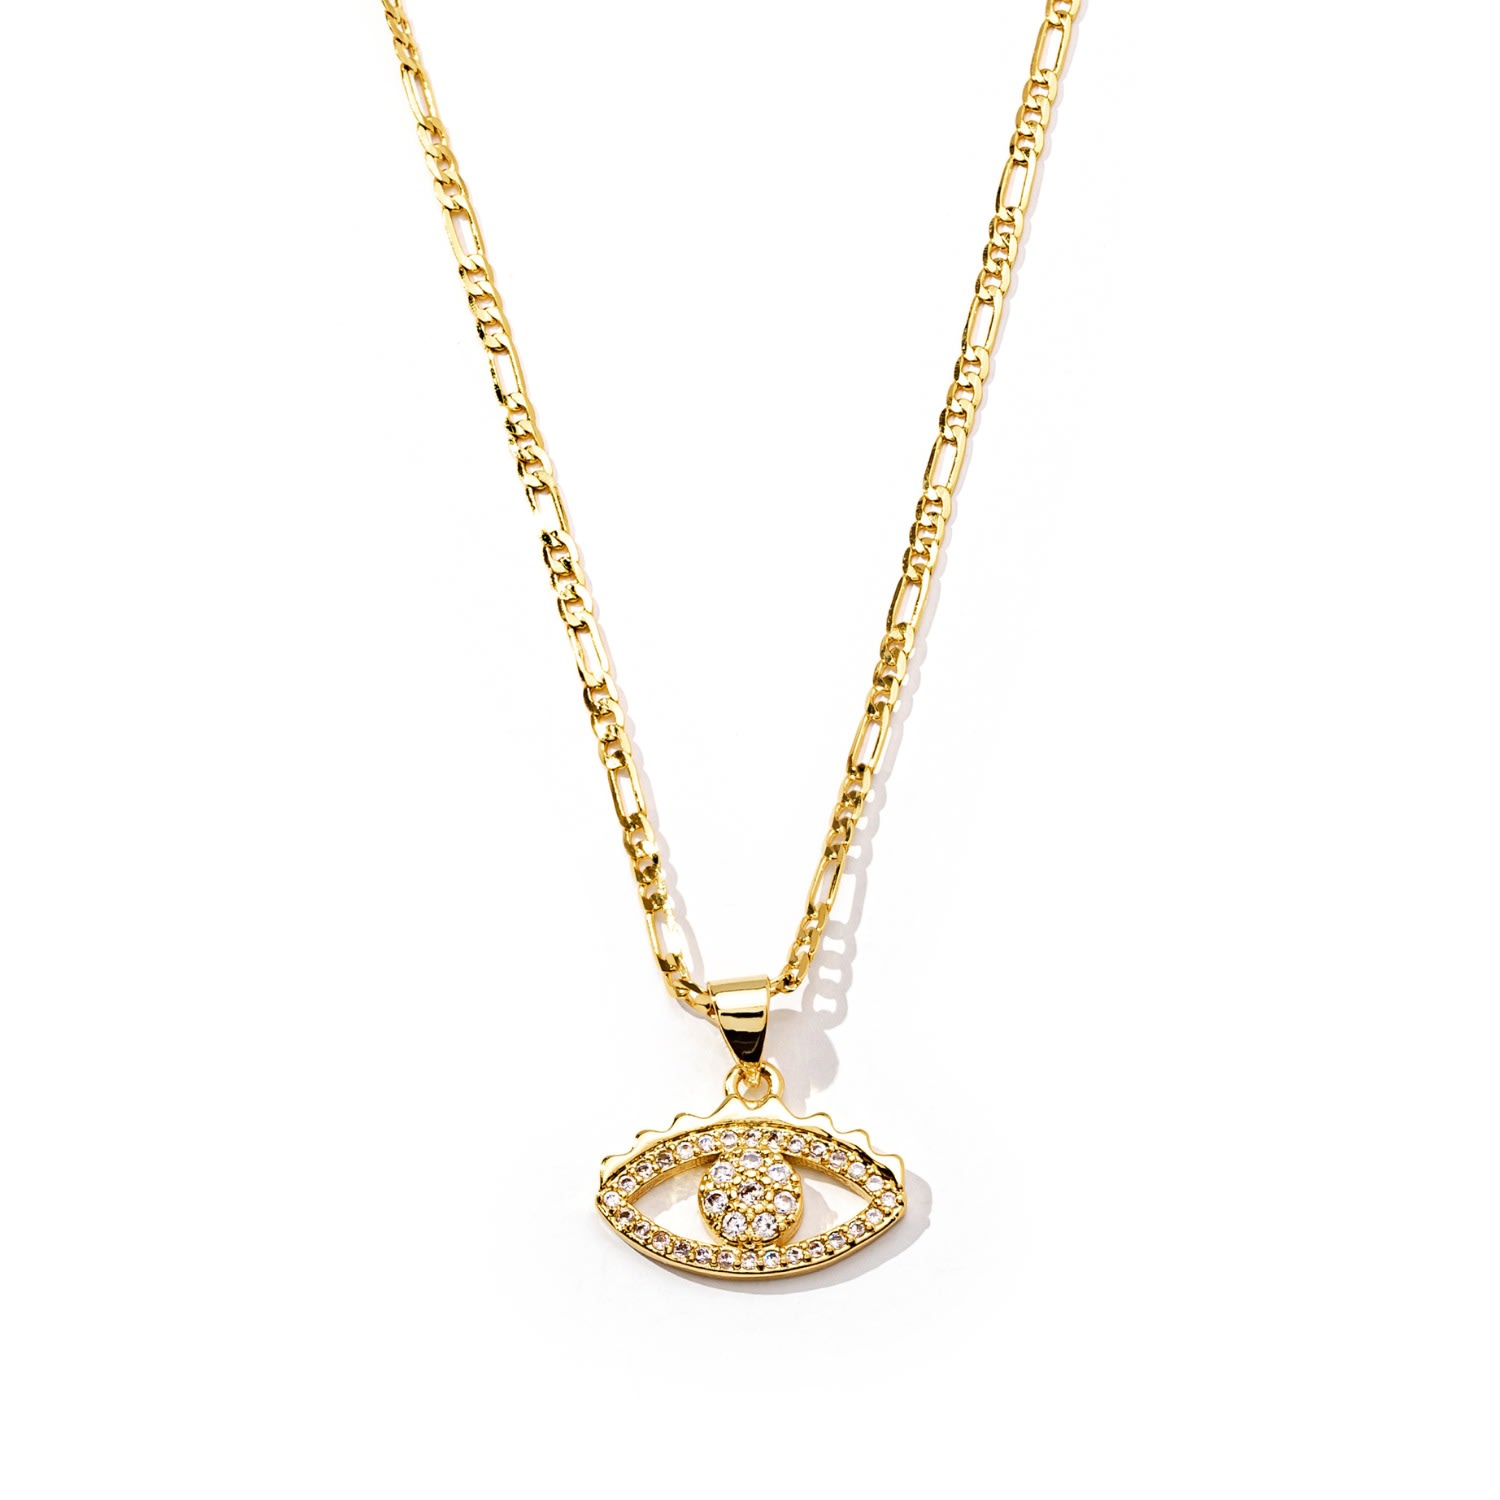 Women's Gold Filled Dainty Evil Eye Pendant Necklace The Essential Jewels